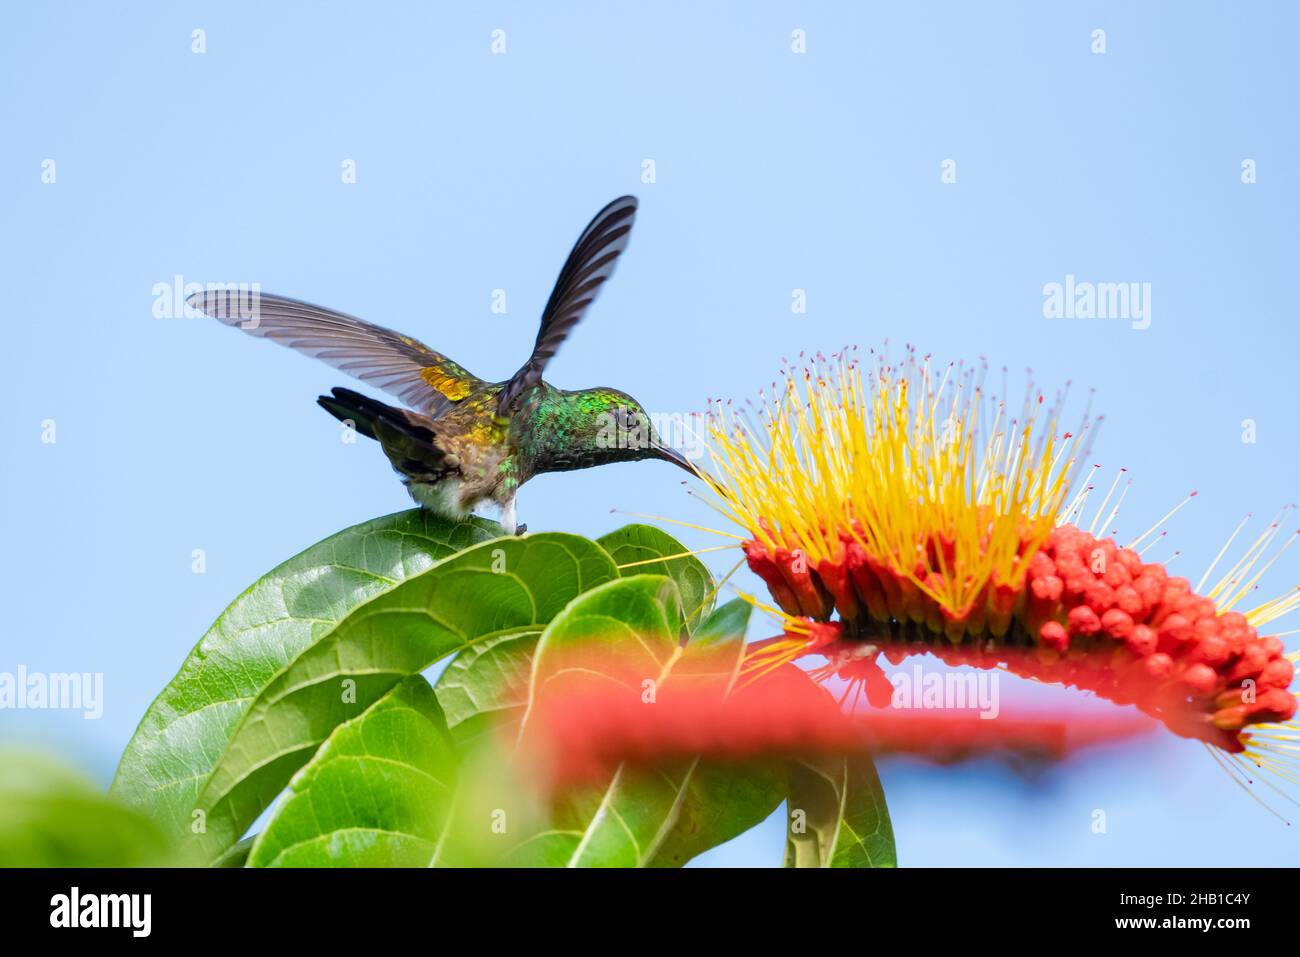 Glittering green Copper-rumped hummingbird feeding on a tropical Combretum flower isolated against the blue sky. Stock Photo